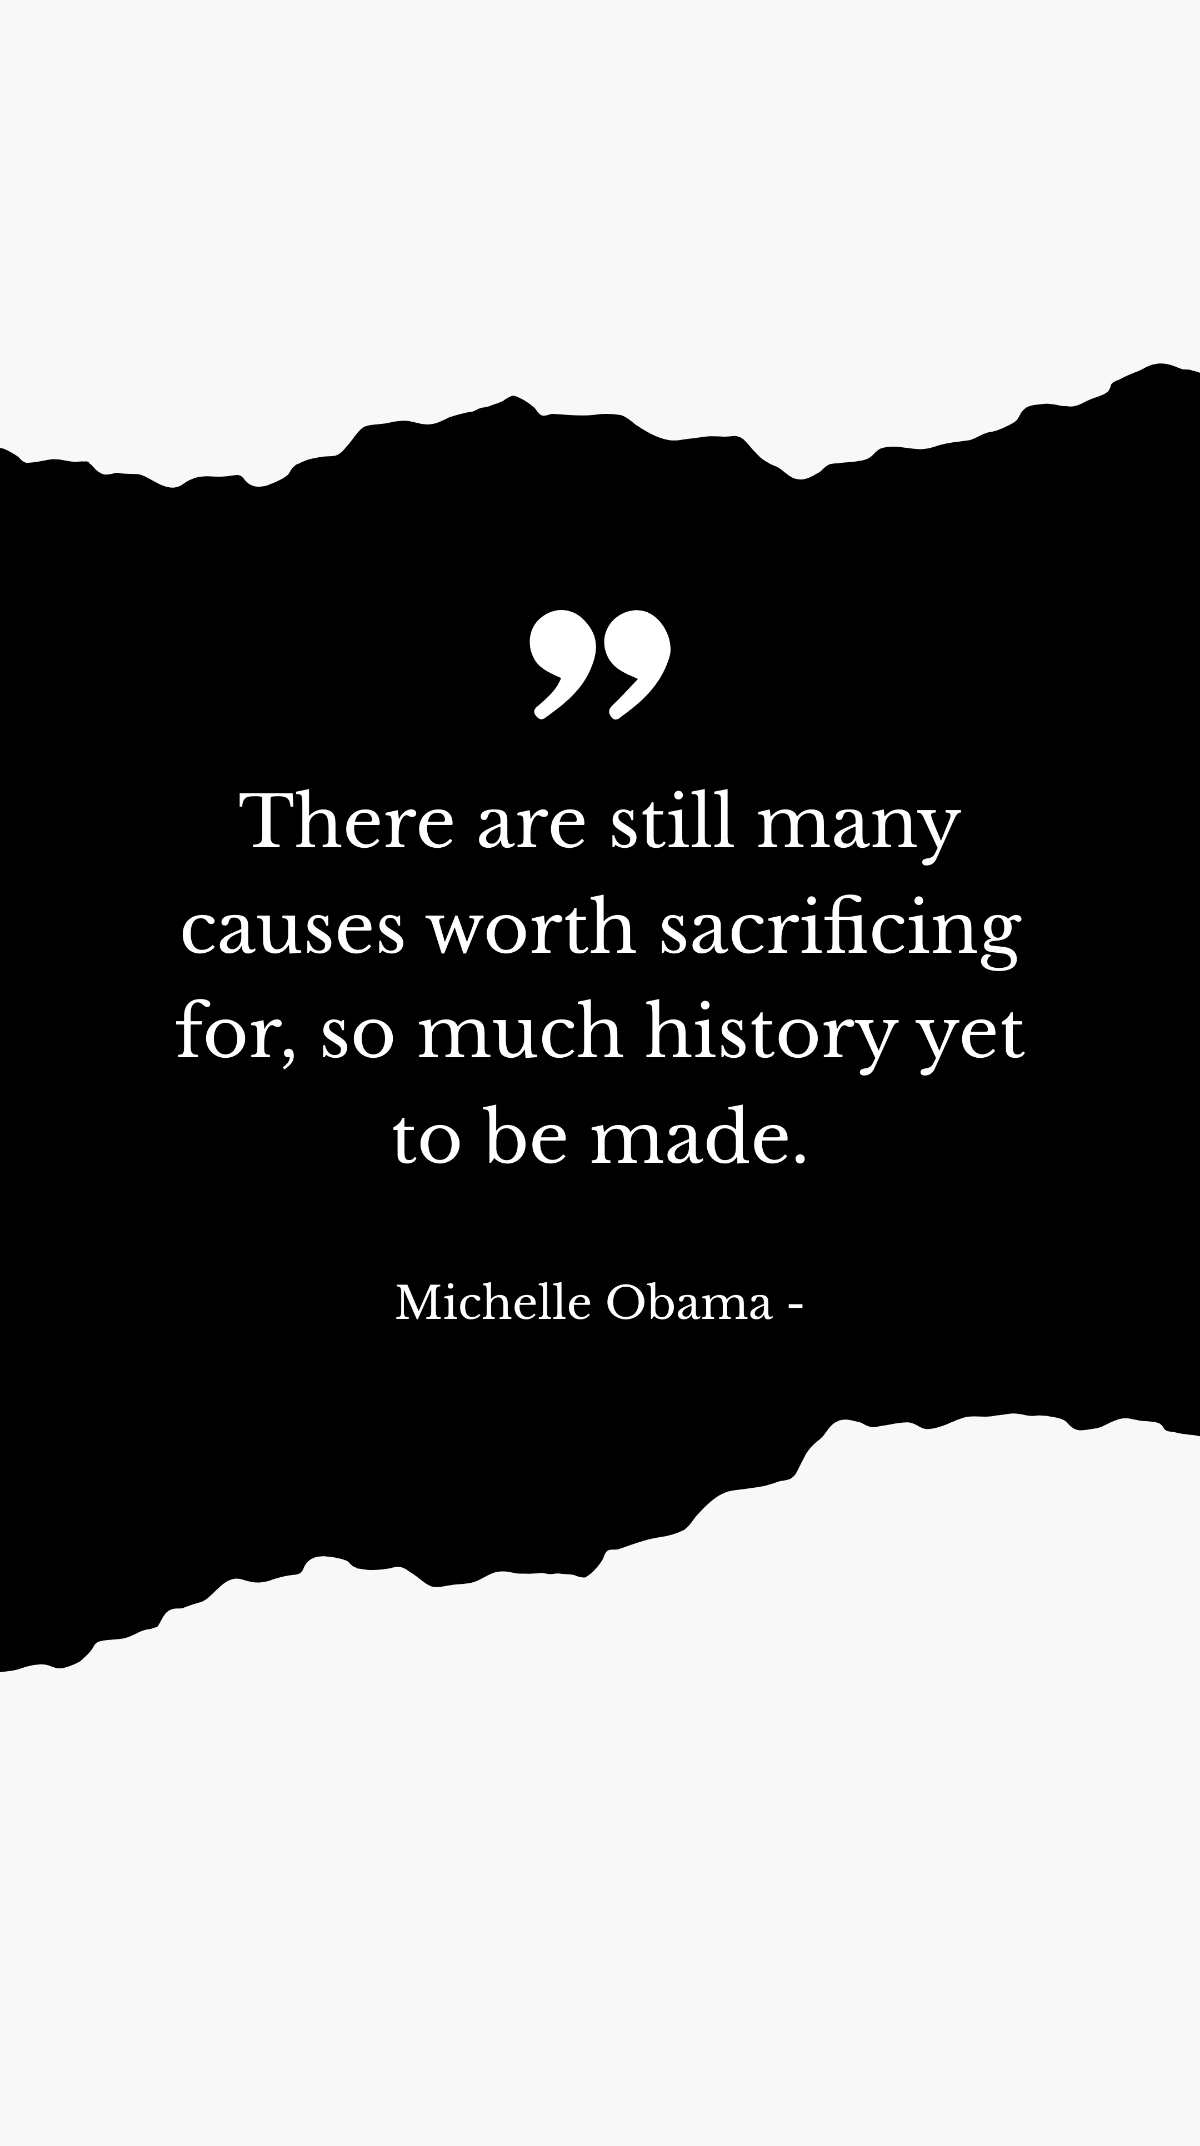 Michelle Obama - There are still many causes worth sacrificing for, so much history yet to be made. Template